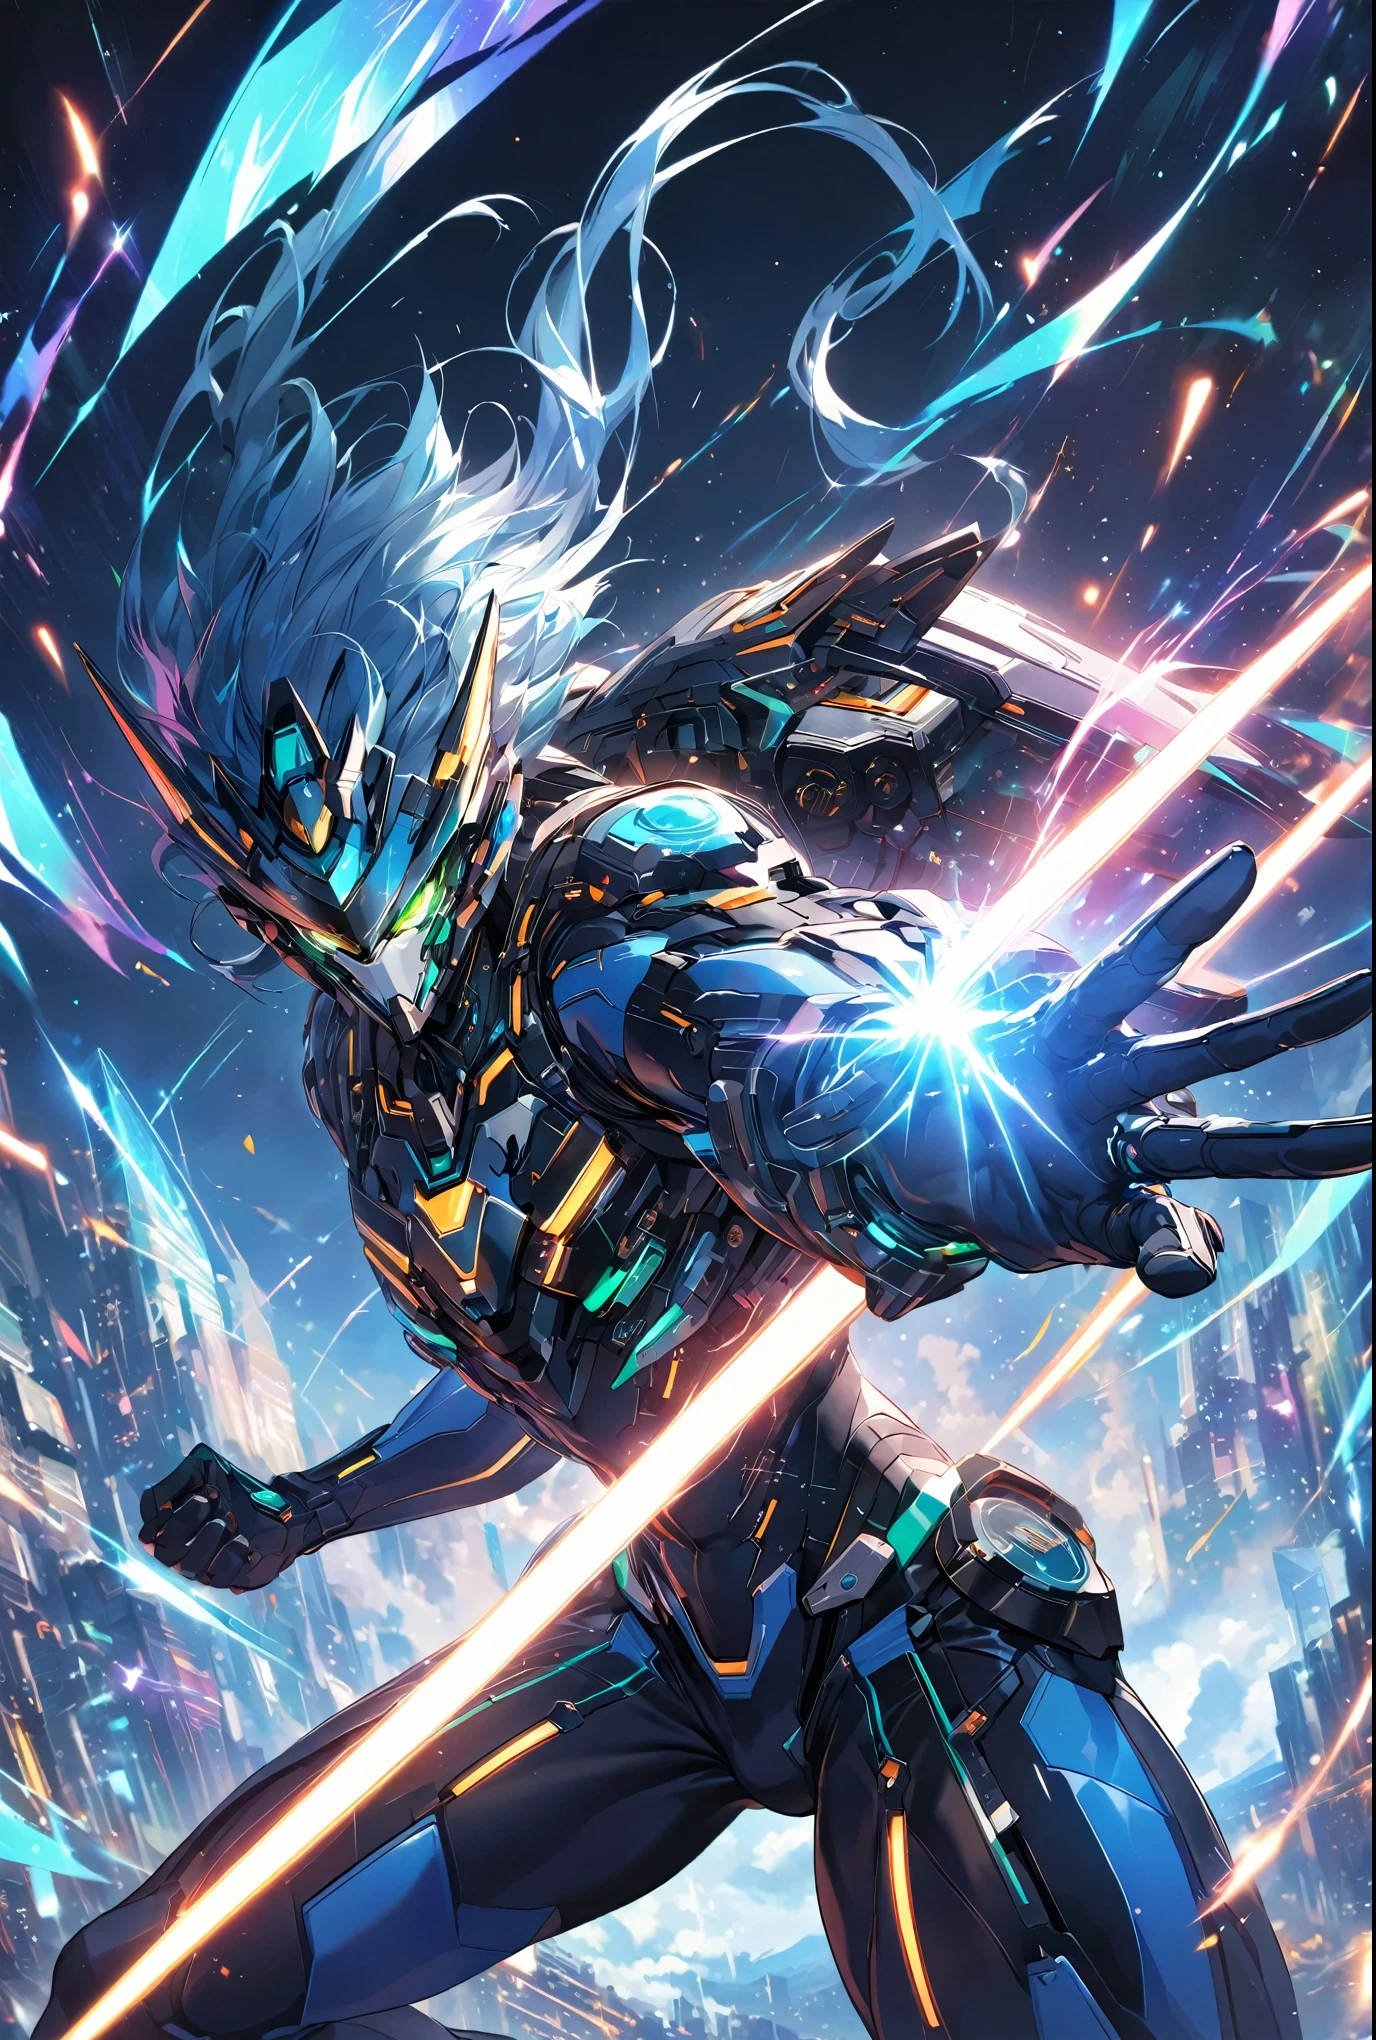 A dynamic male character in a futuristic black and blue cyber suit with glowing LED lines, short spiky blue hair, and sharp green eyes. He is tall, muscular, and has an energy backpack on his back. The character is in a combat pose, wielding energy blades, with a serious and focused expression. The background is a digital cityscape with floating holographic elements and light effects, representing a cybernetic world.,Battle Style,cool,The best composition,Intricate details,Very detailed,Disorganized,Anatomically correct